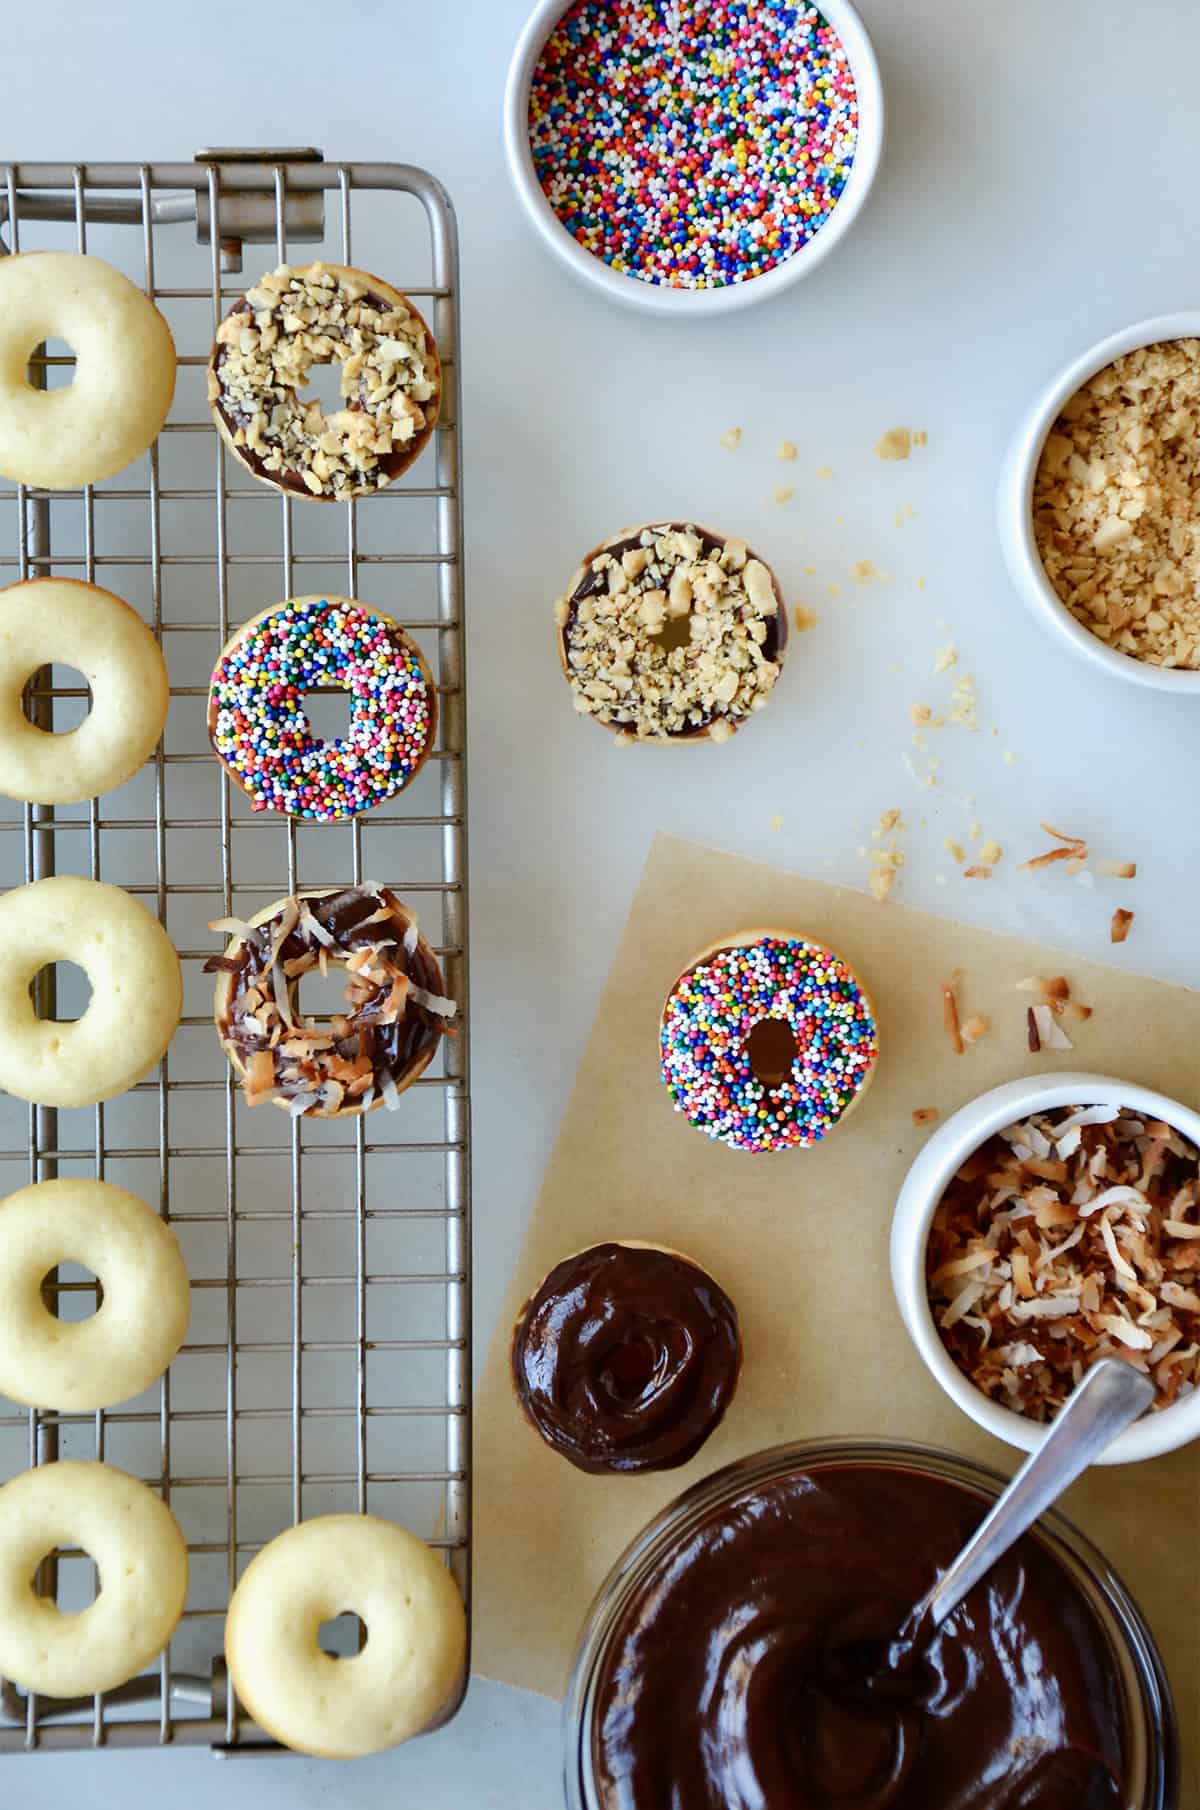 Baked doughnuts on a wire cooling rack. Topped doughnuts and bowls of Nutella glaze, sprinkles, chopped nuts and toasted coconut are beside the cooling rack.